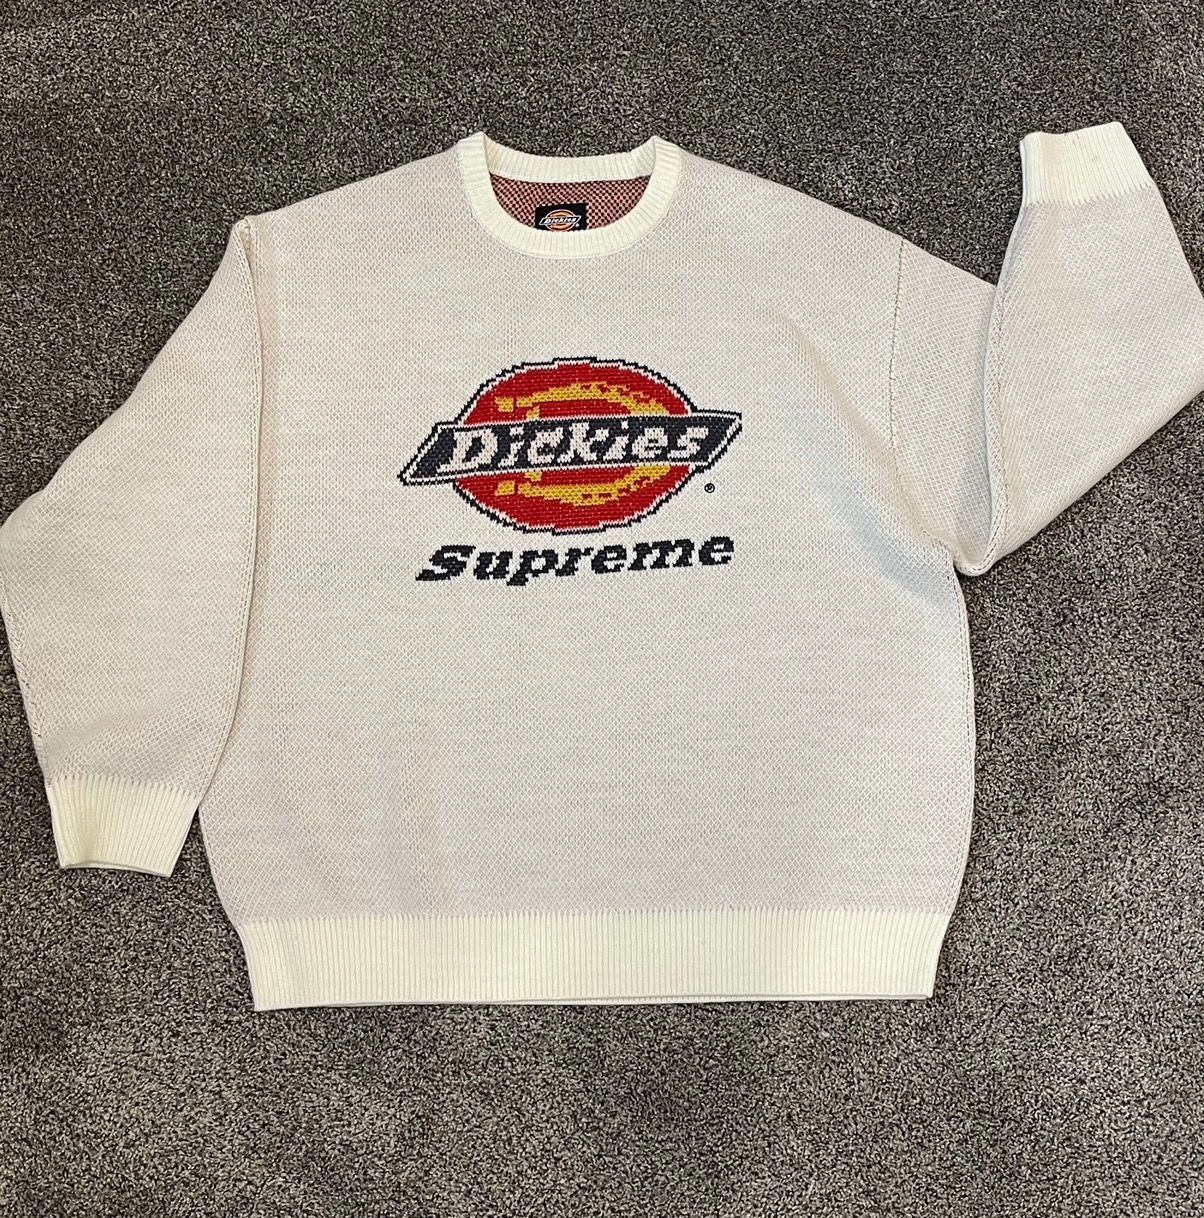 Supreme Supreme X Dickies White Knit Sweater | Grailed